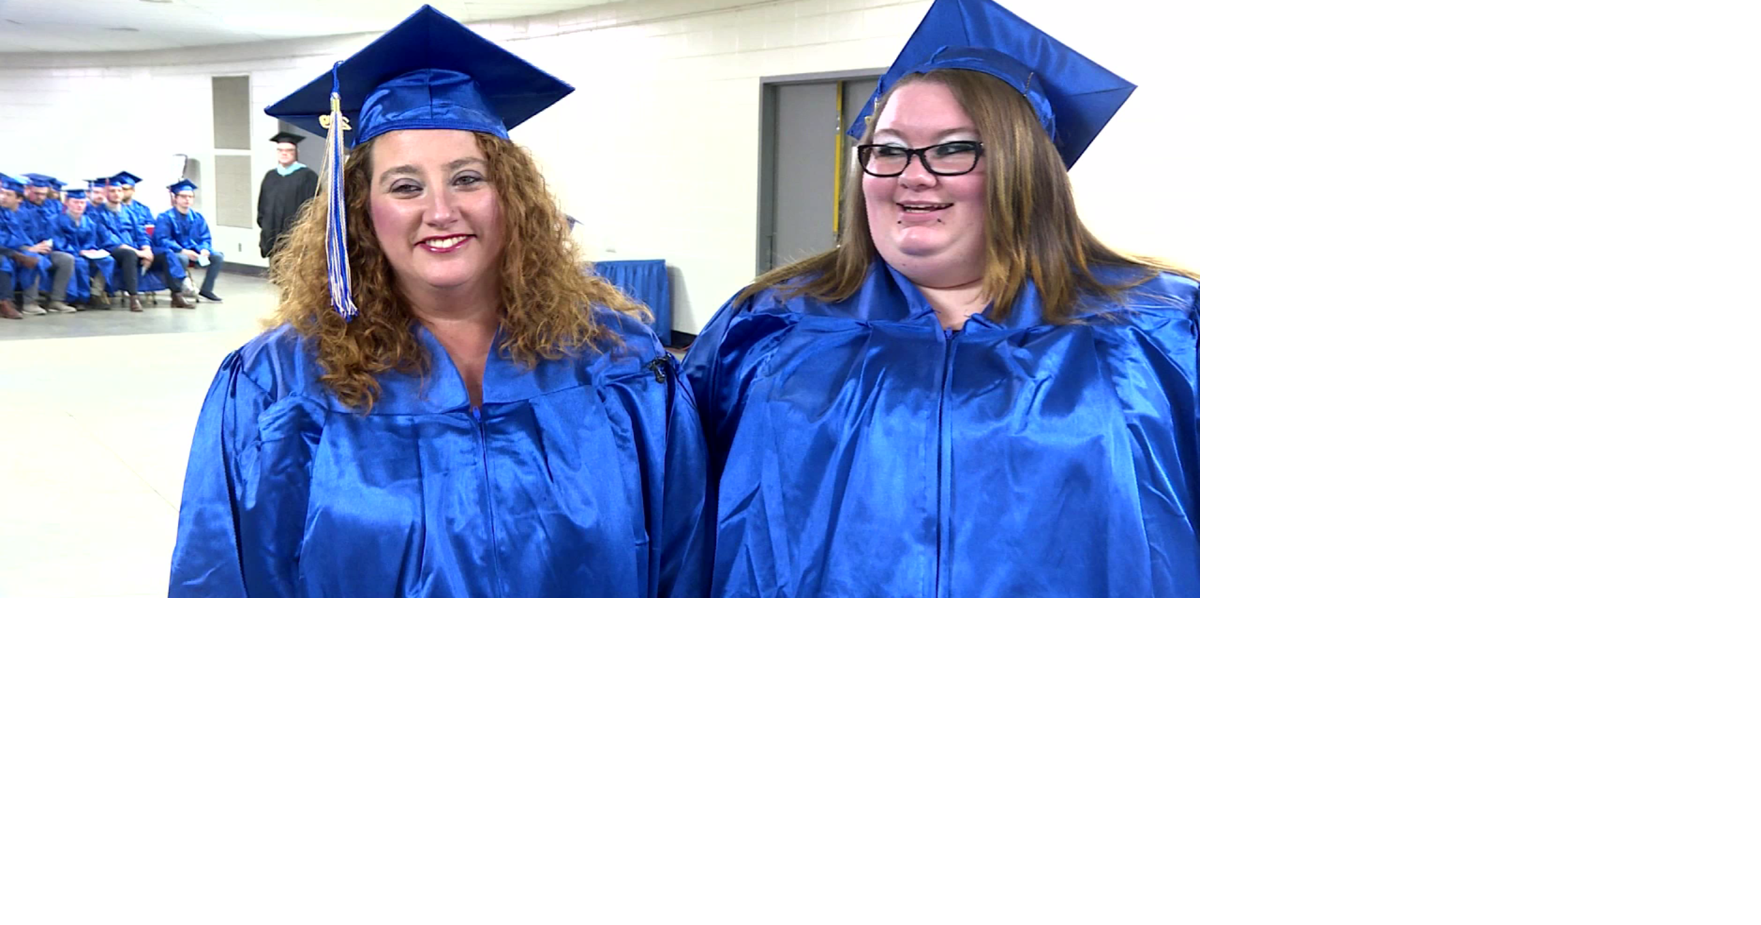 Motherdaughter team grab diplomas together at Madison College